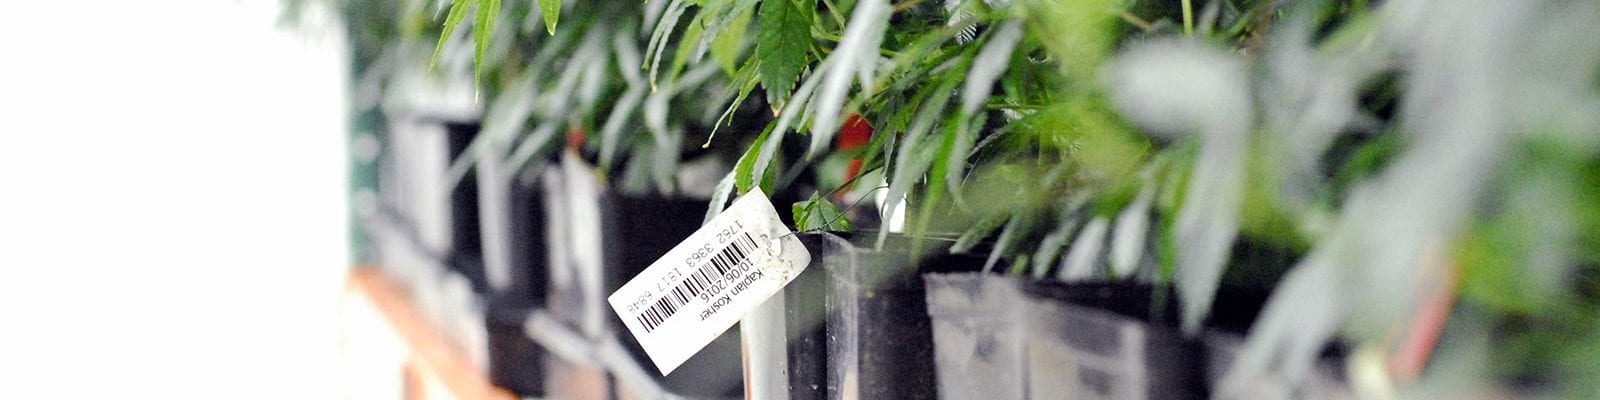 Cannabis clones inside of a licensed I-502 facility in Washington state.